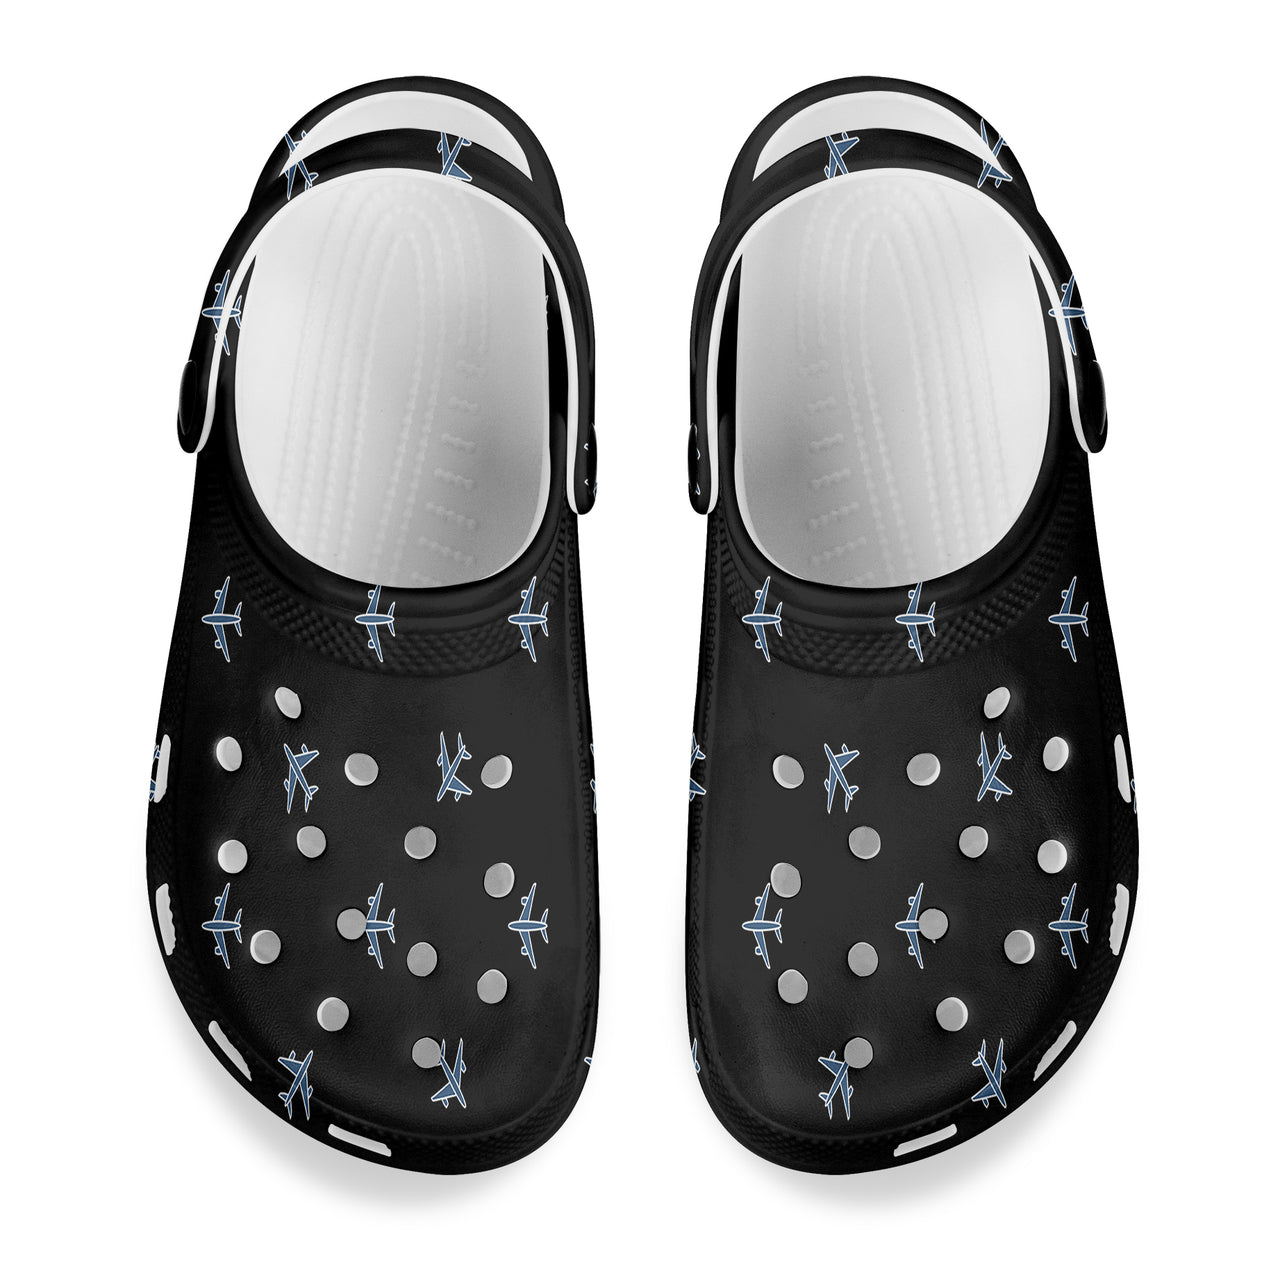 Nice Airplanes (Black) Designed Hole Shoes & Slippers (MEN)